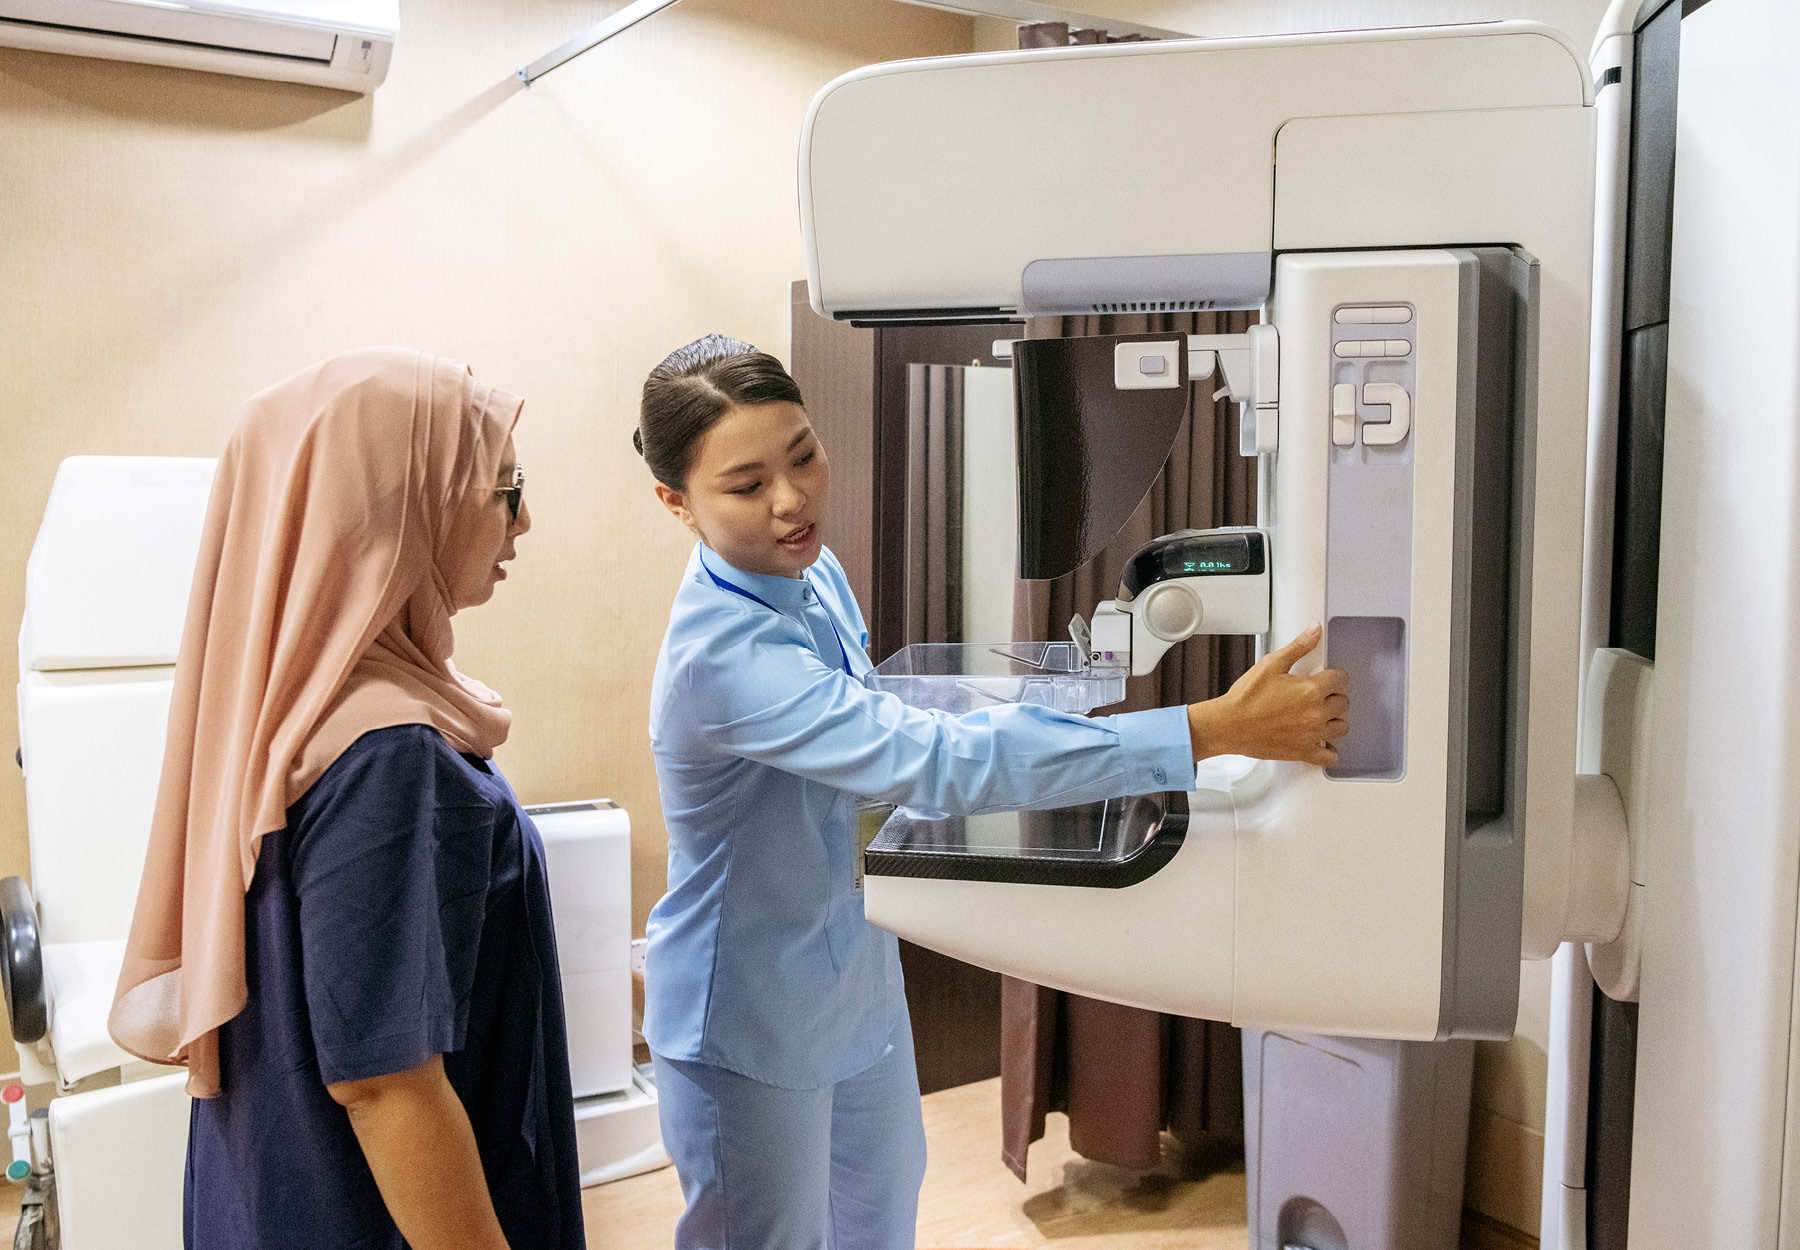 A technologist sets up a mammogram machine while a patient in a hijab looks on.